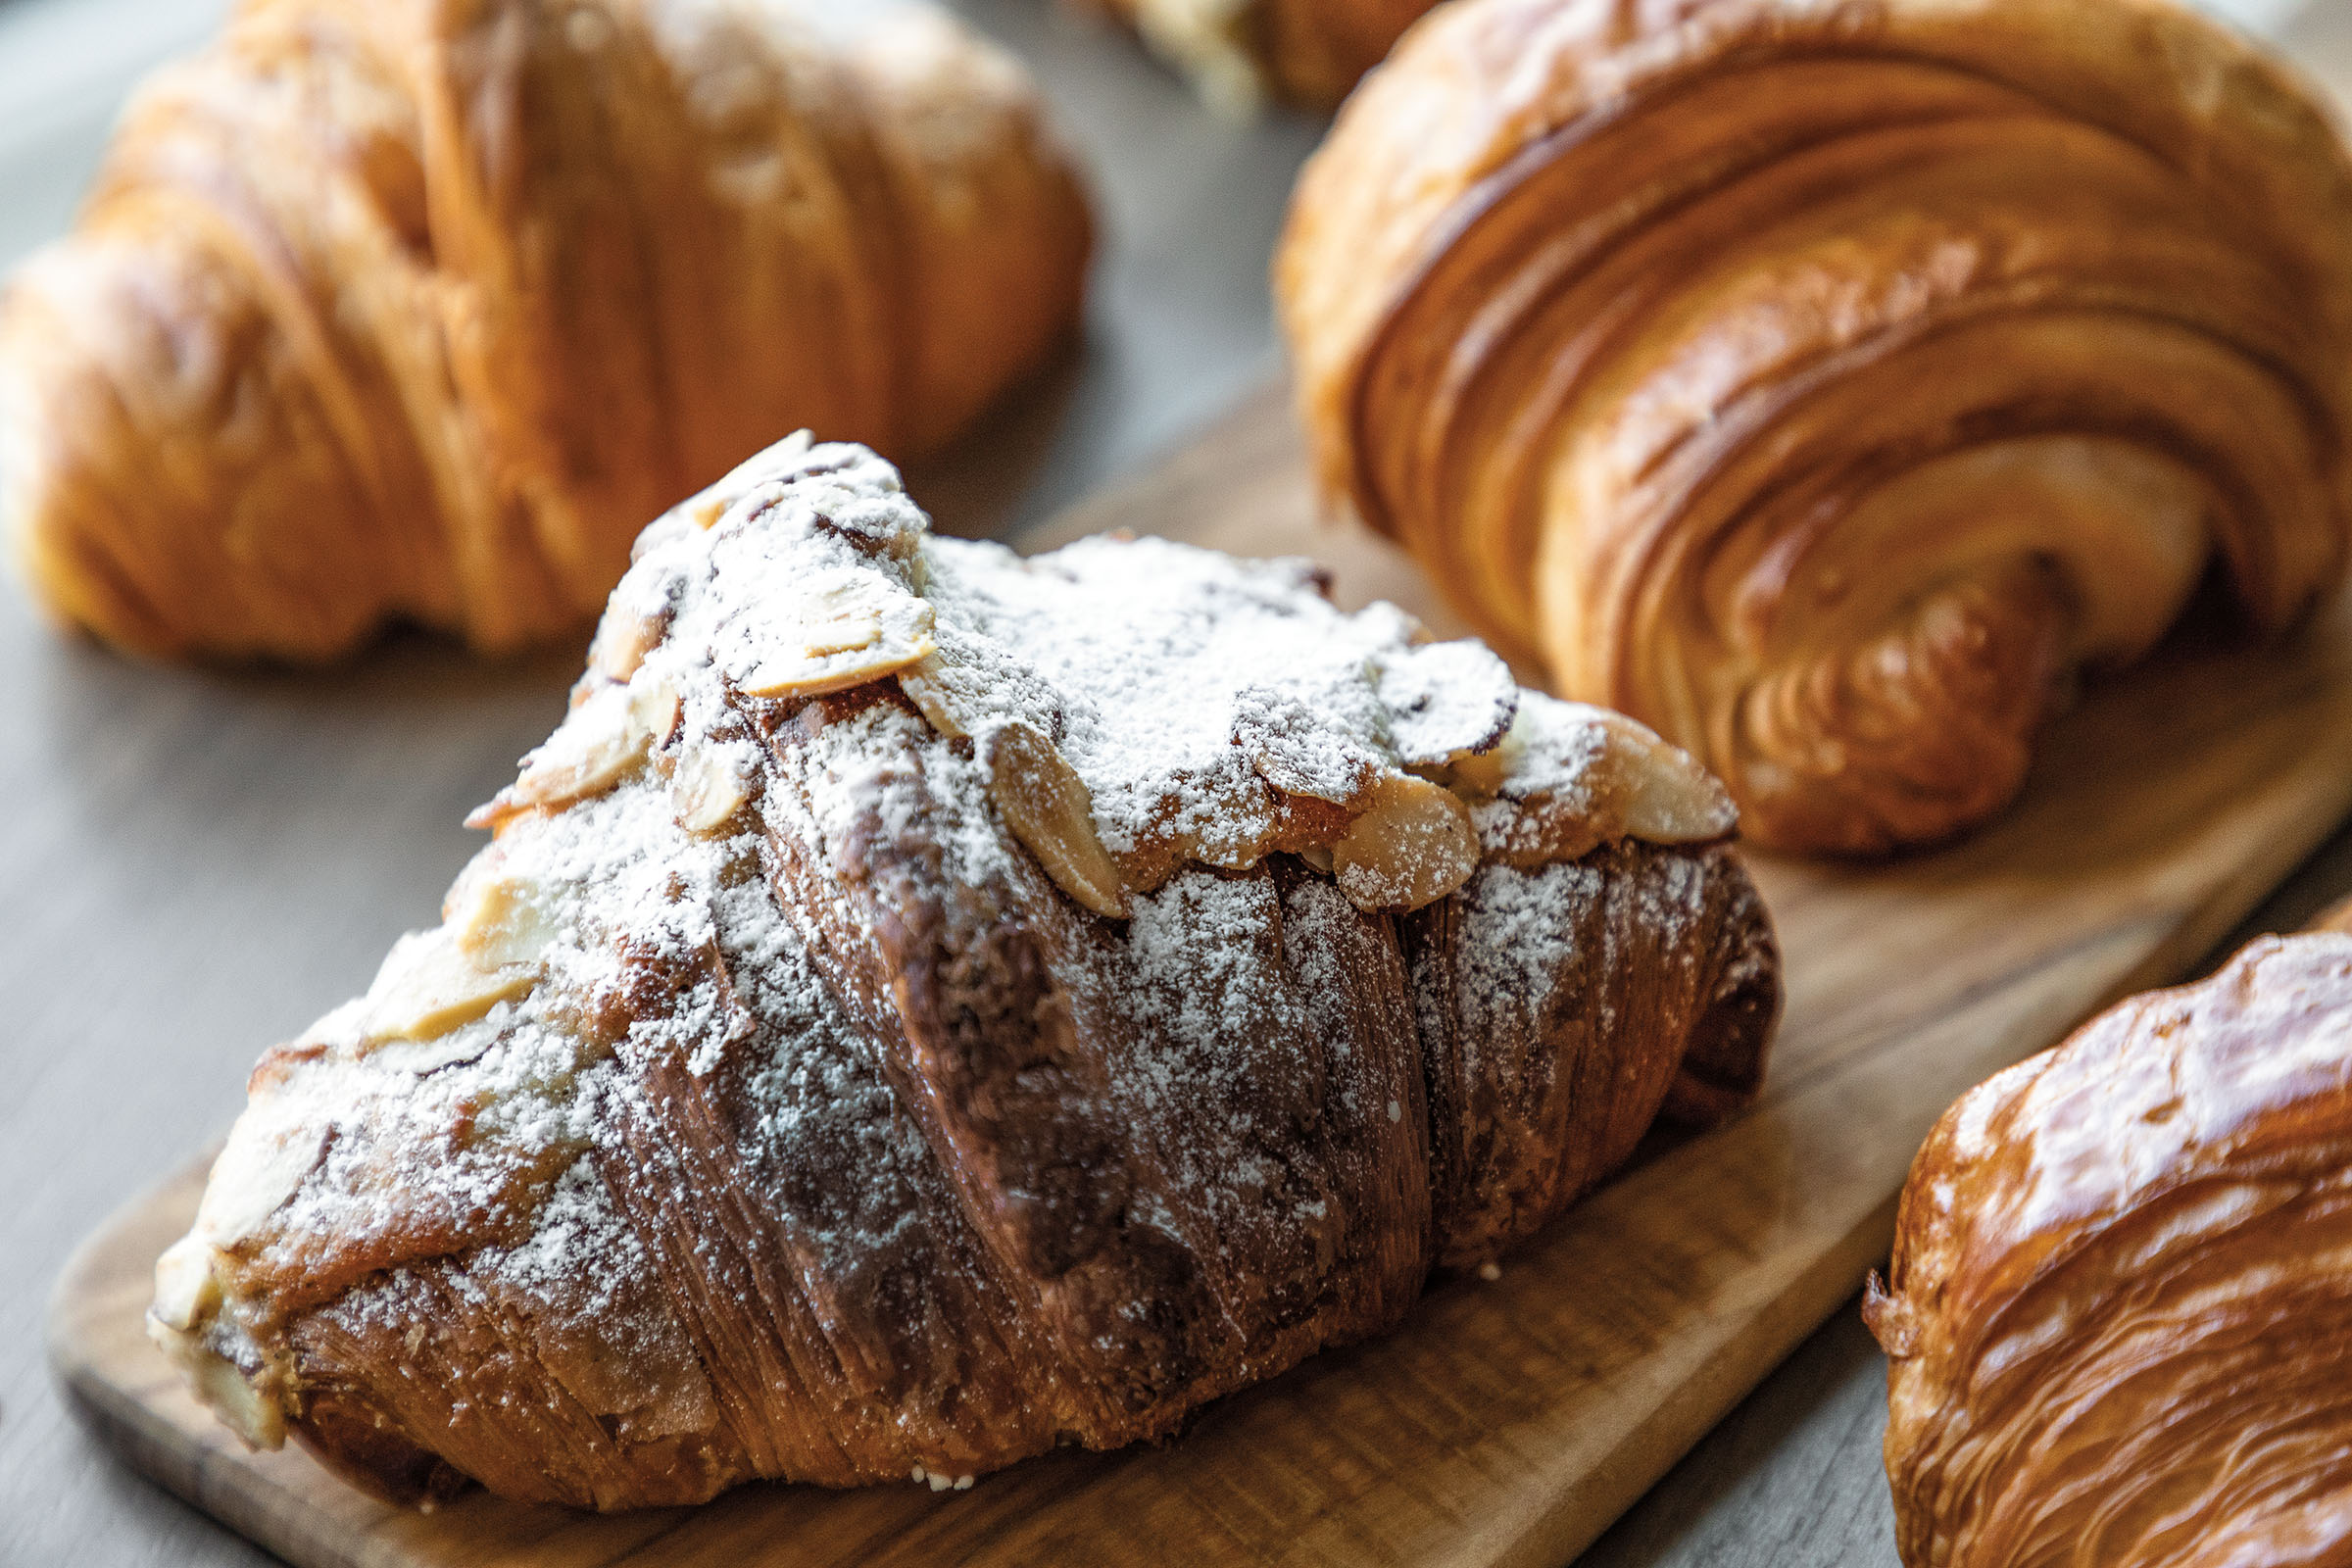 Golden croissants, one topped with powdered sugar and sliced almonds